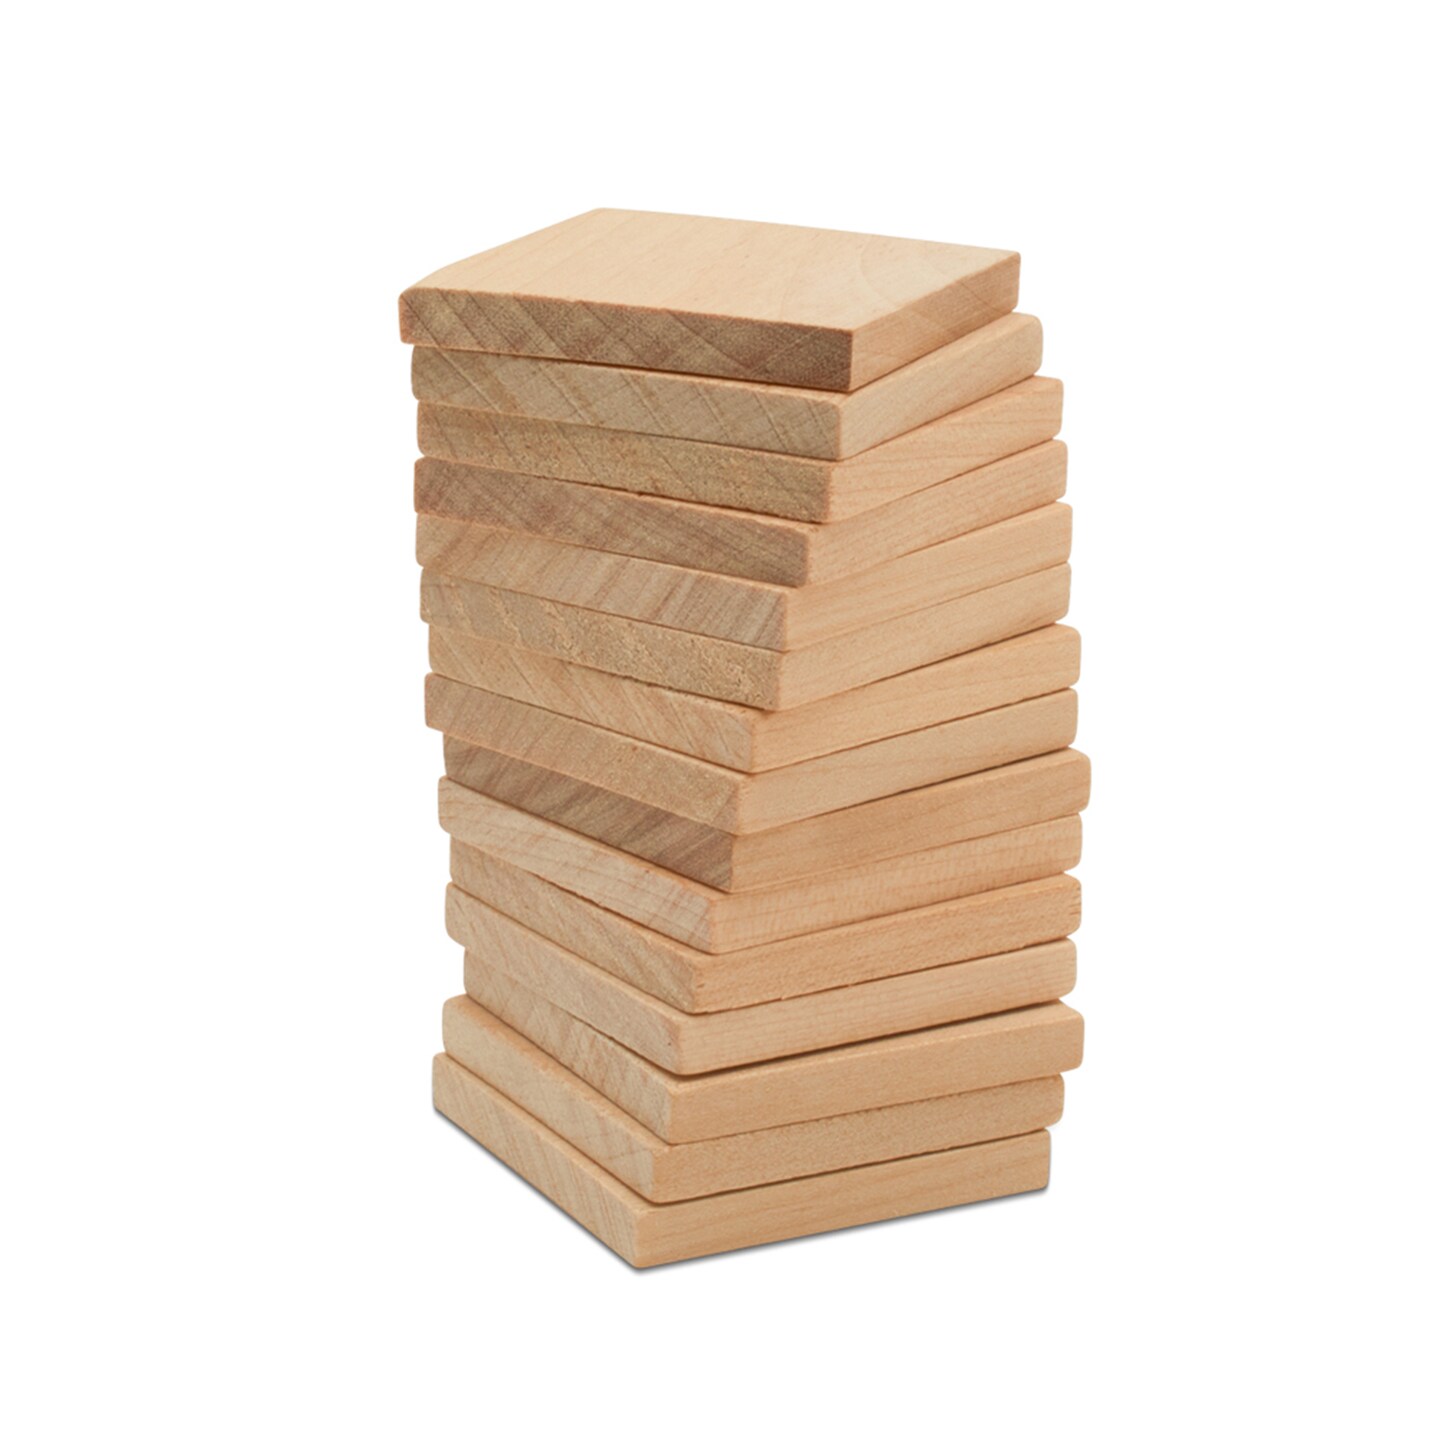 Wood Tiles, Multiple Sizes Available, Blank Wood Squares for